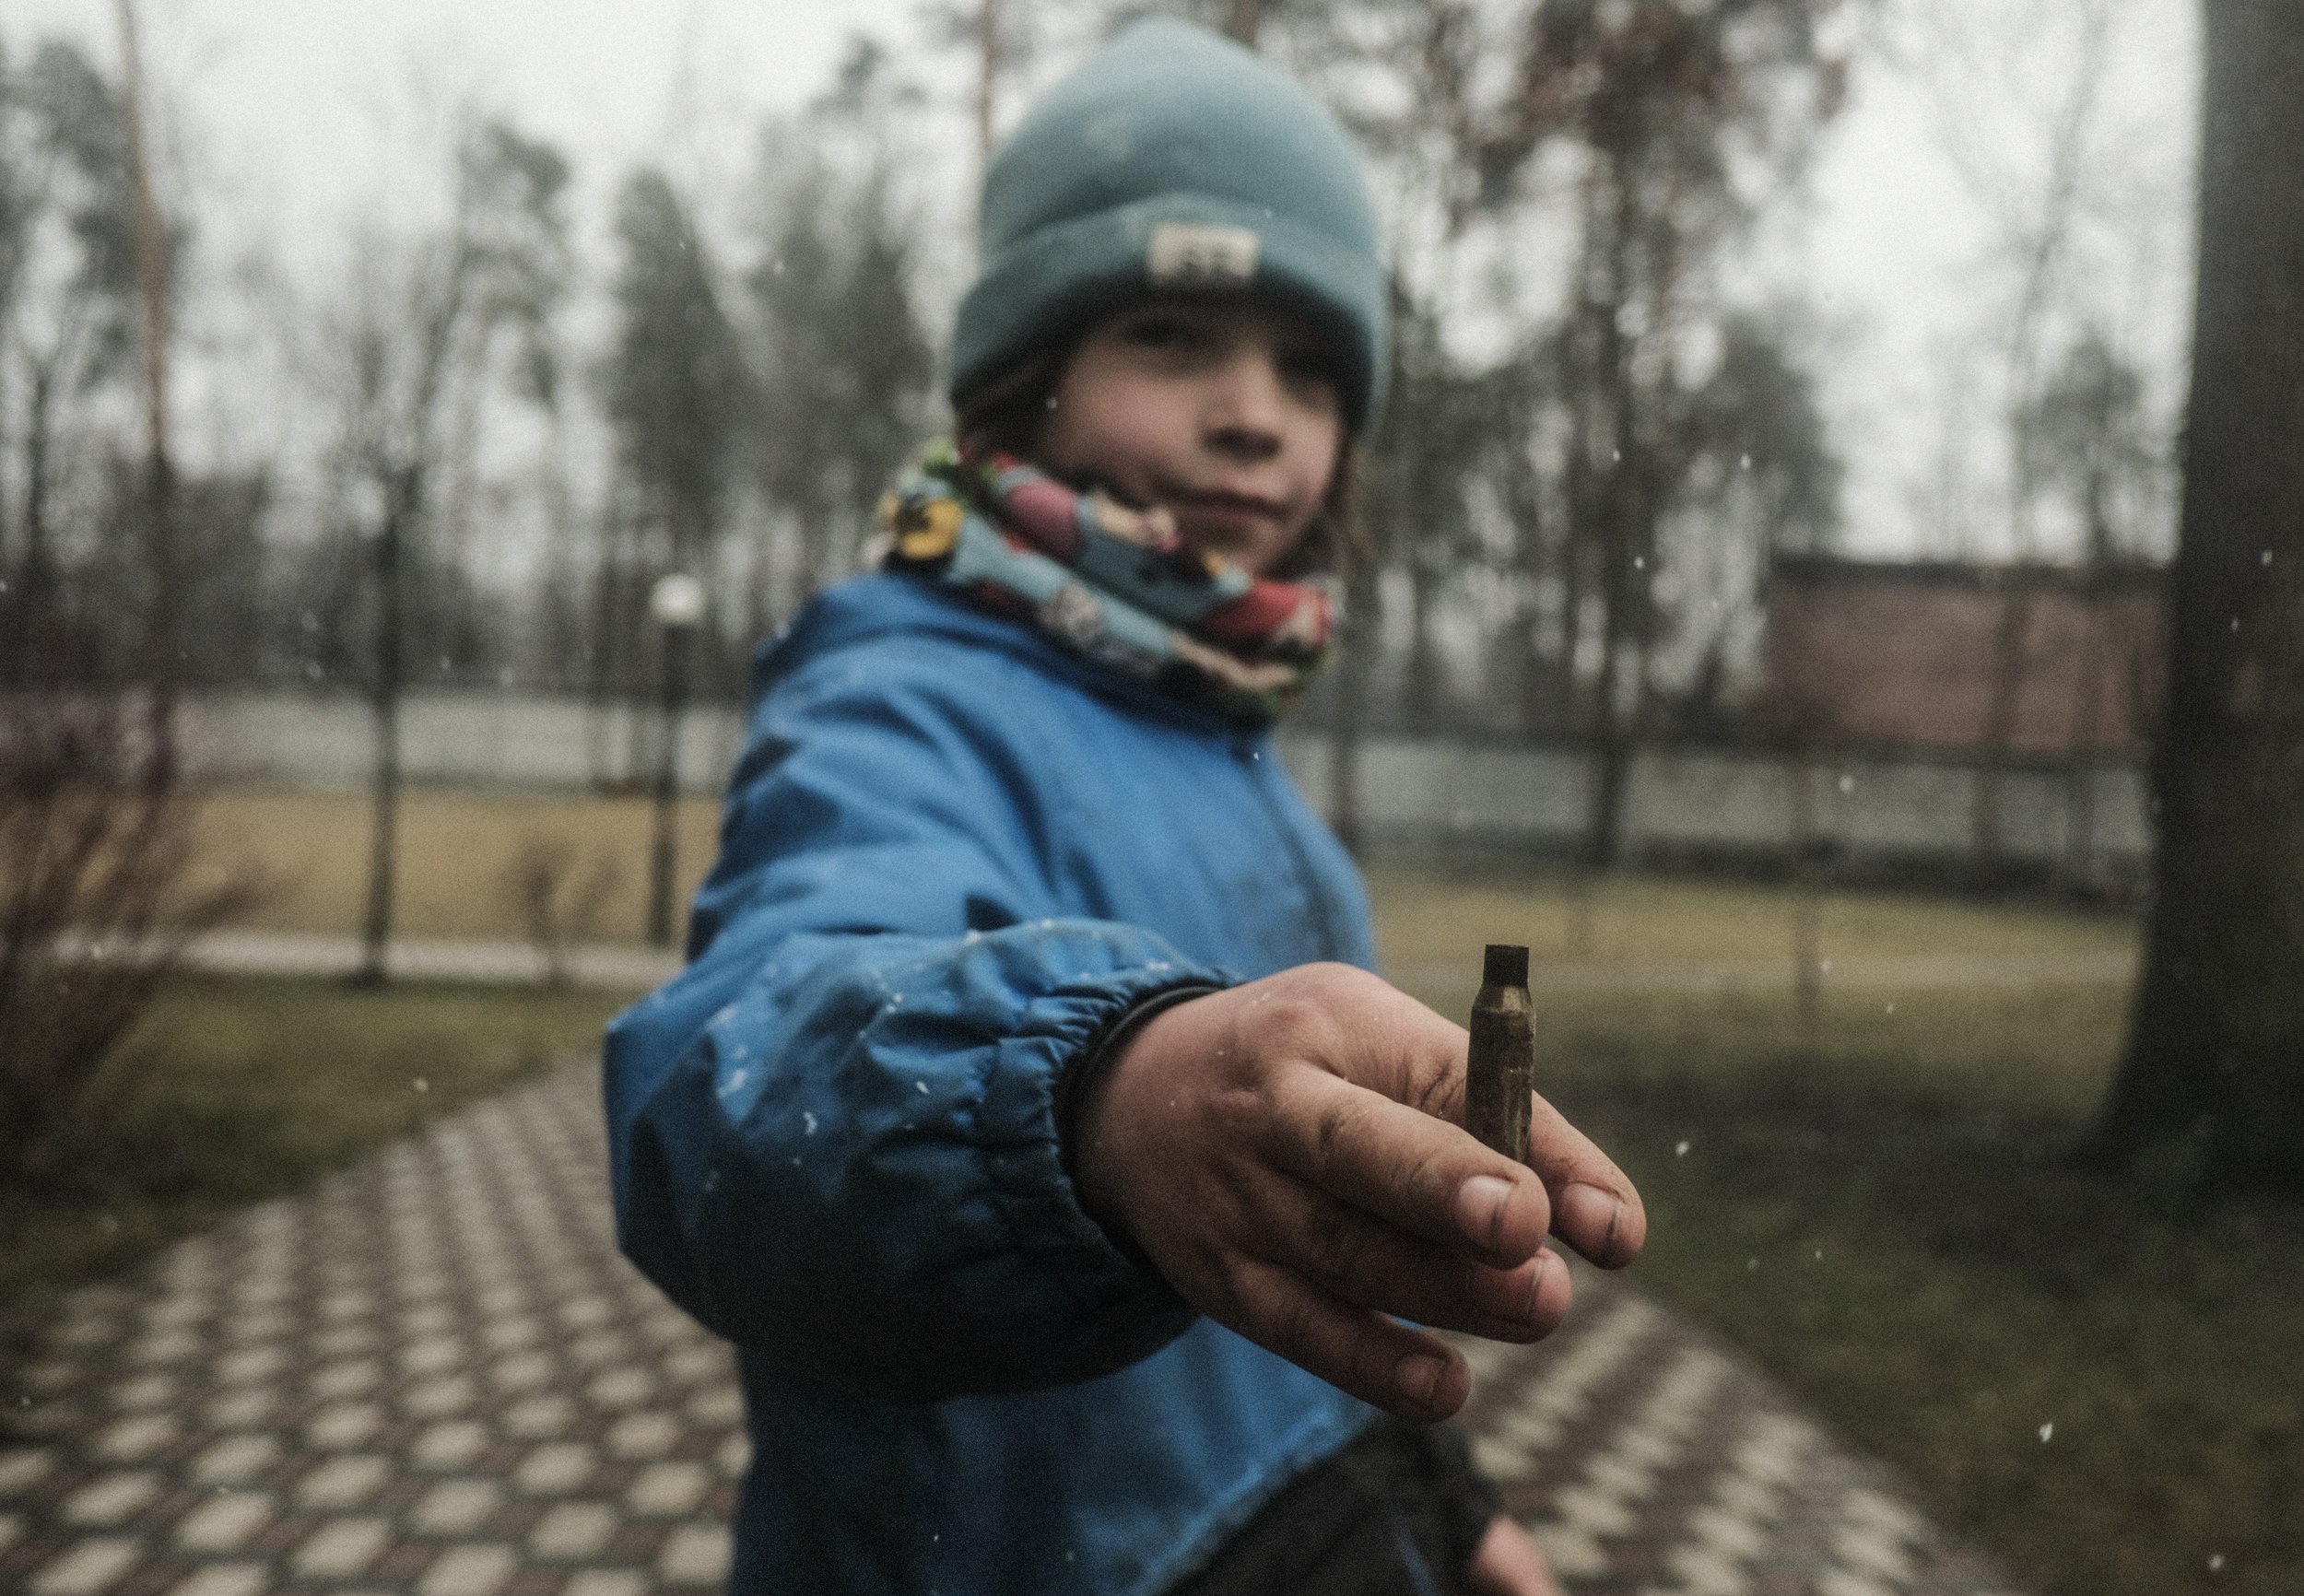  A child holds up a shell casing for a picture in Bucha, Ukraine on April 3, 2022. The child and his family hid in the basement of their apartment building during the heavy fighting and occupation of the town. Following the liberation by Ukrainian tr